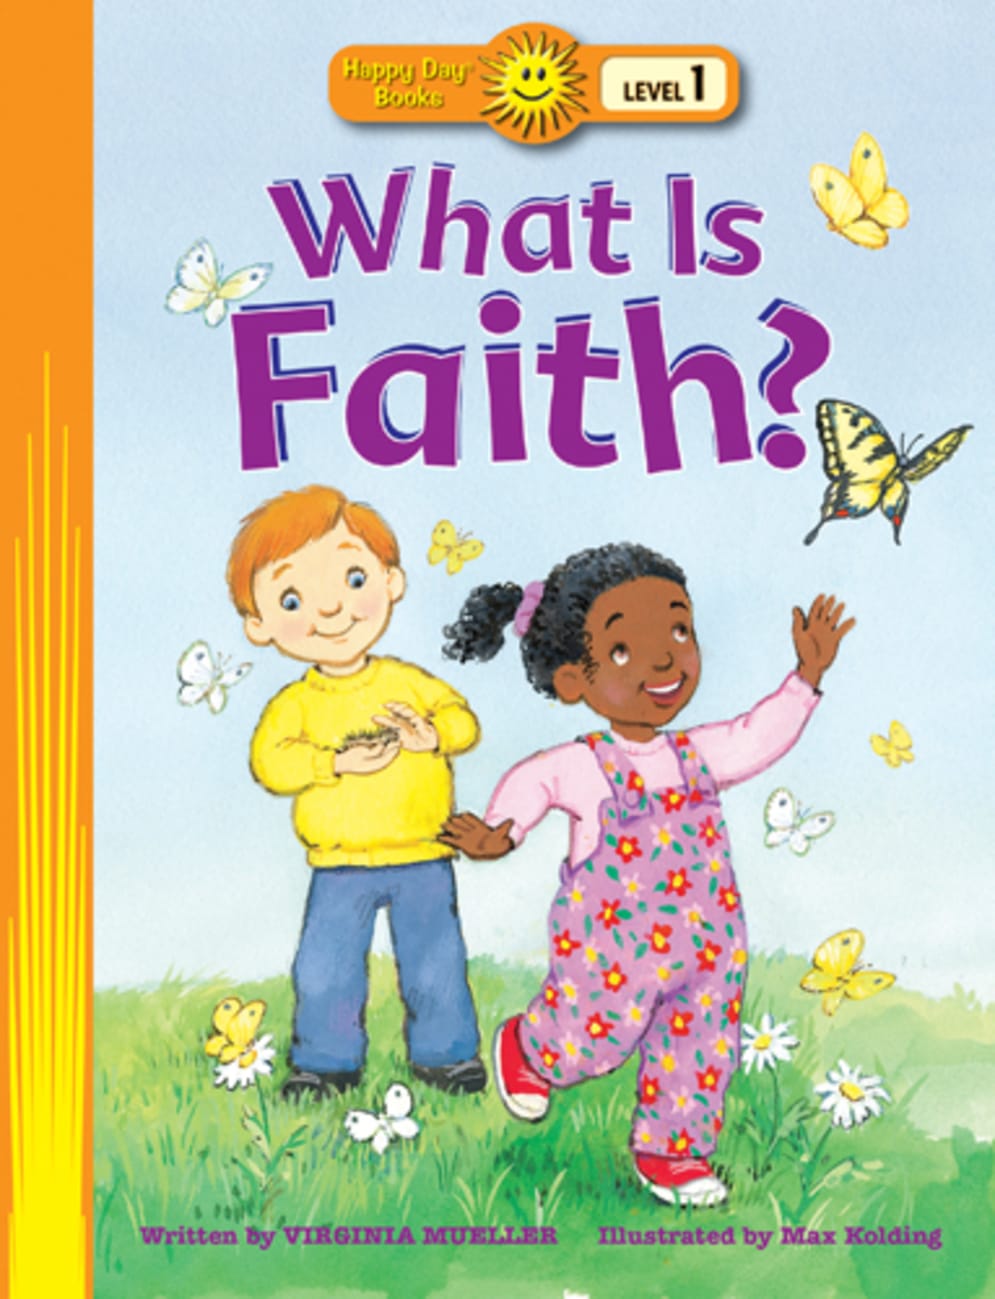 What is Faith? (Happy Day Level 1 Pre-readers Series) Paperback